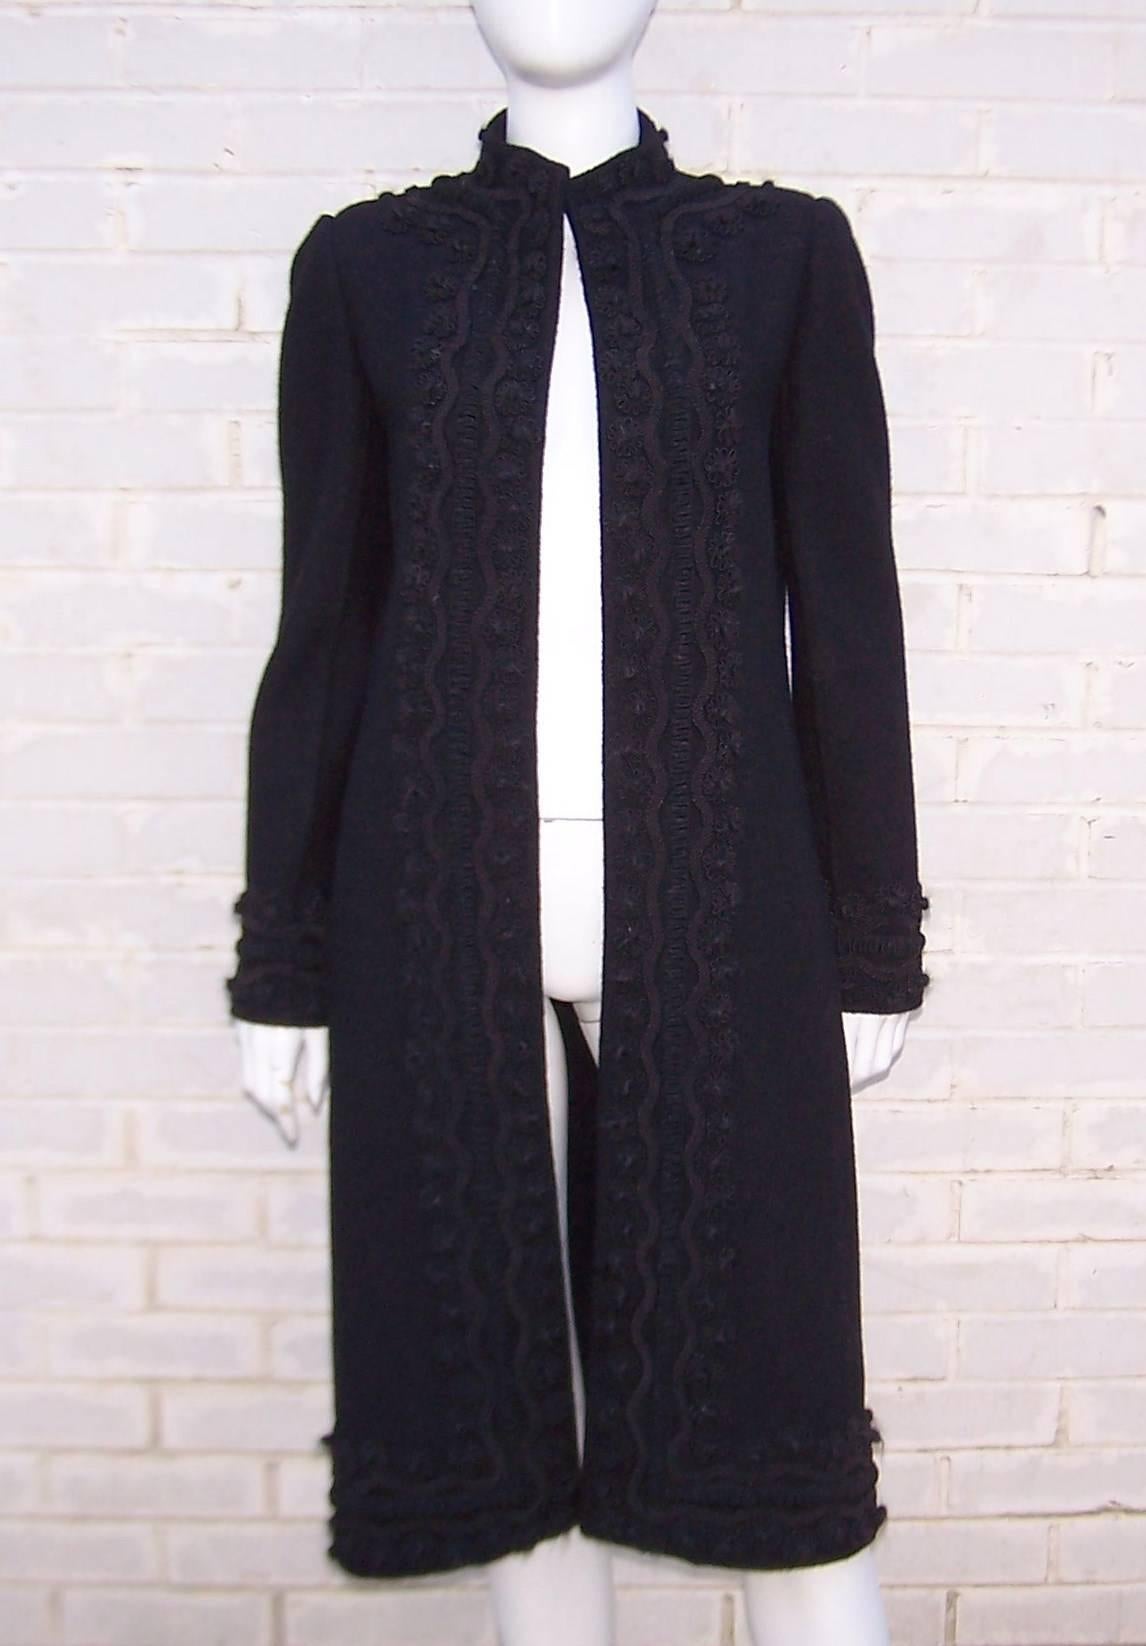 Oh the luxury of a beautifully appointed Oscar De La Renta coat!  This ladylike coat is designed with black boucle wool and trimmed at the neckline, shoulder and cuffs with Victorian influenced passementerie decoration that adds visual interest and